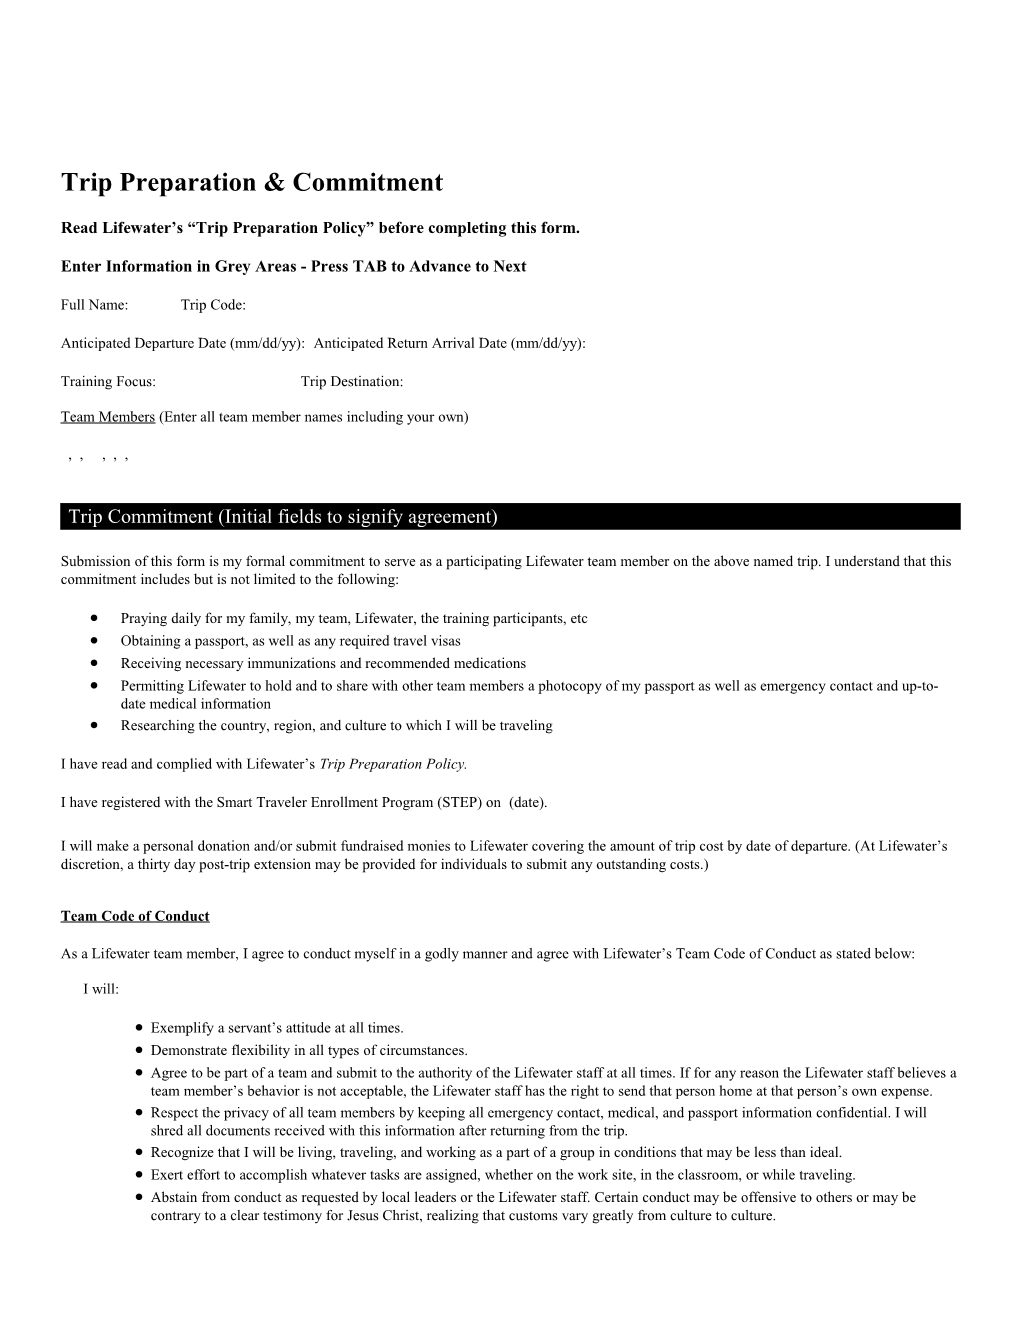 Read Lifewater S Trip Preparation Policy Before Completing This Form